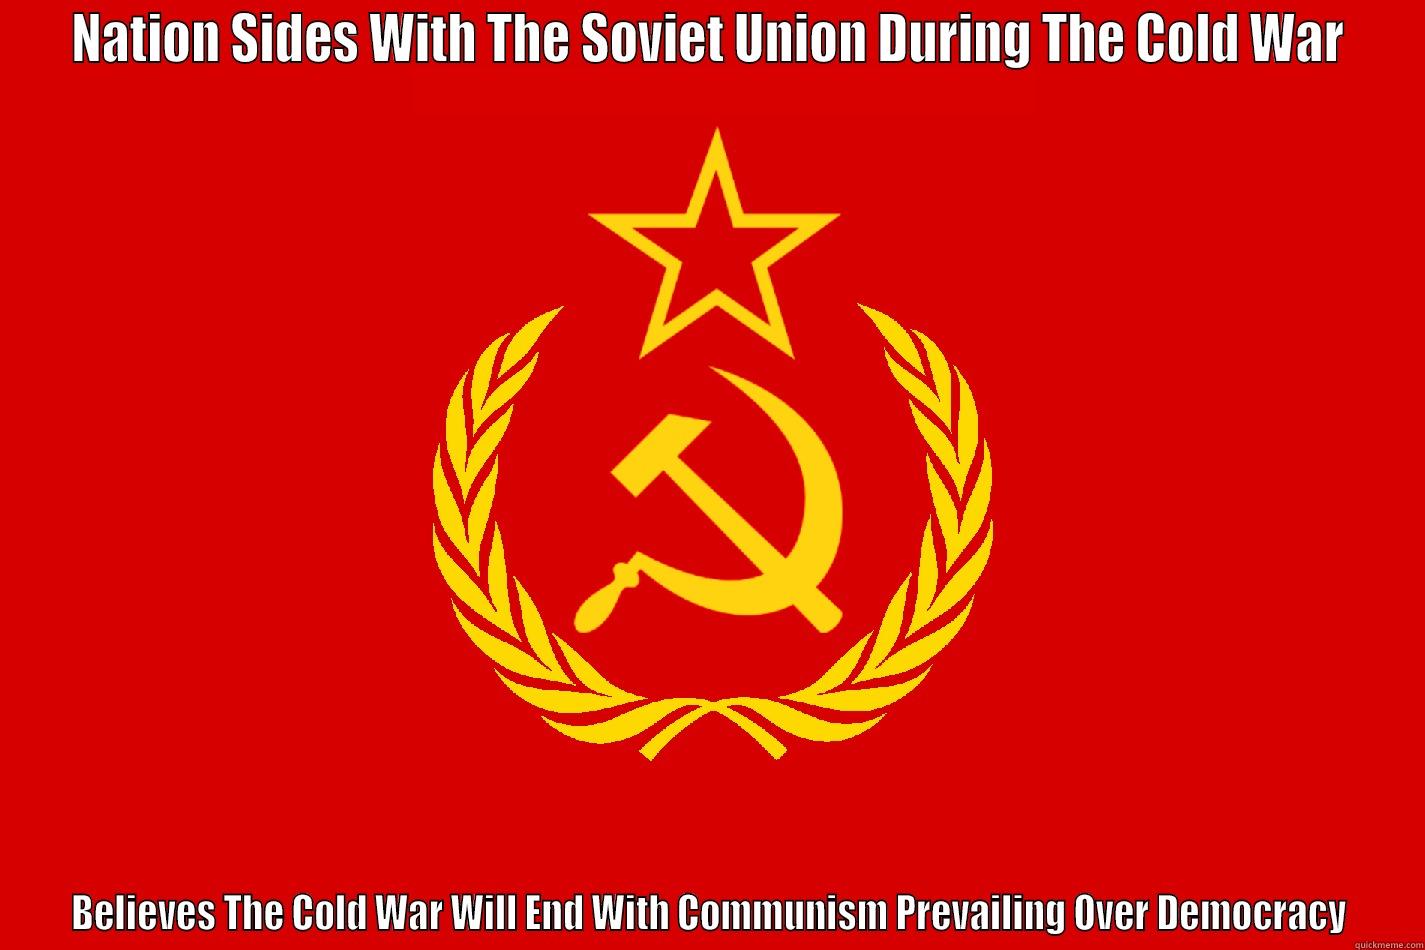 NATION SIDES WITH THE SOVIET UNION DURING THE COLD WAR BELIEVES THE COLD WAR WILL END WITH COMMUNISM PREVAILING OVER DEMOCRACY Misc